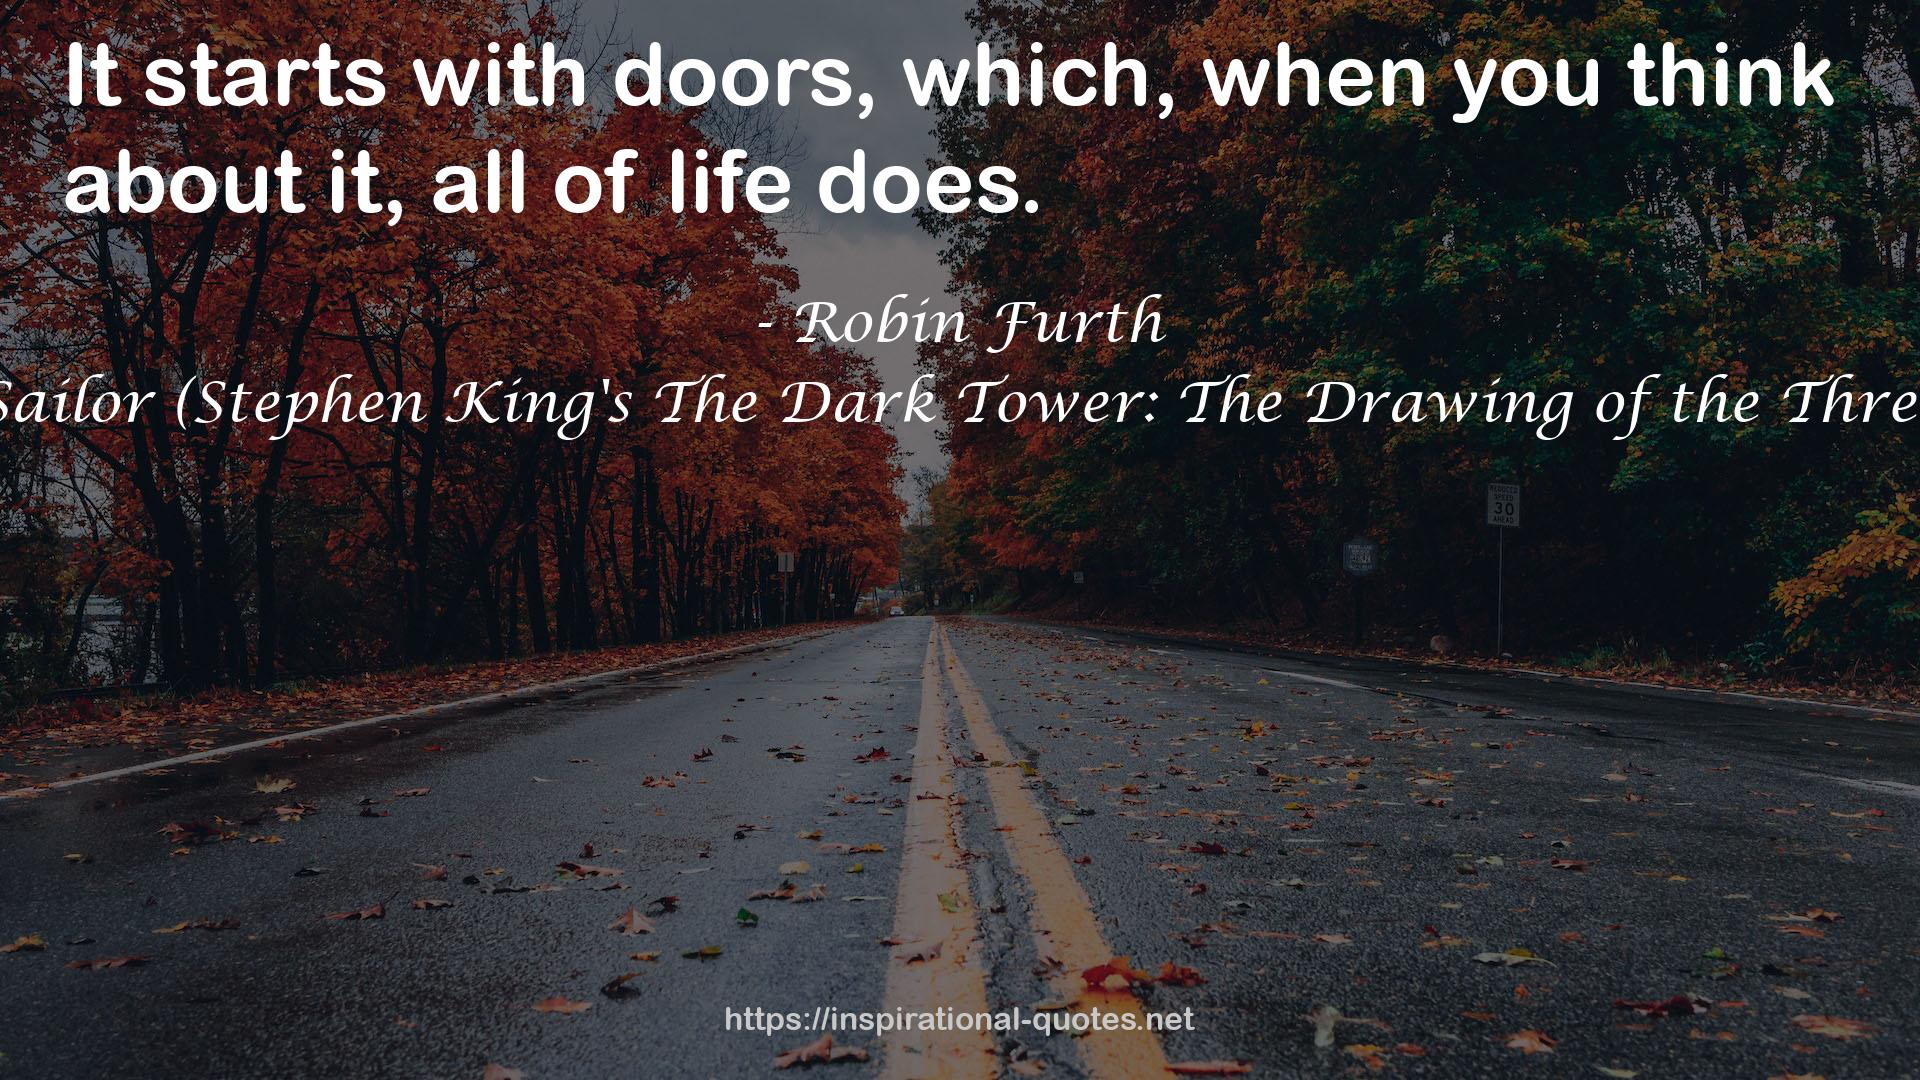 The Sailor (Stephen King's The Dark Tower: The Drawing of the Three, #5) QUOTES